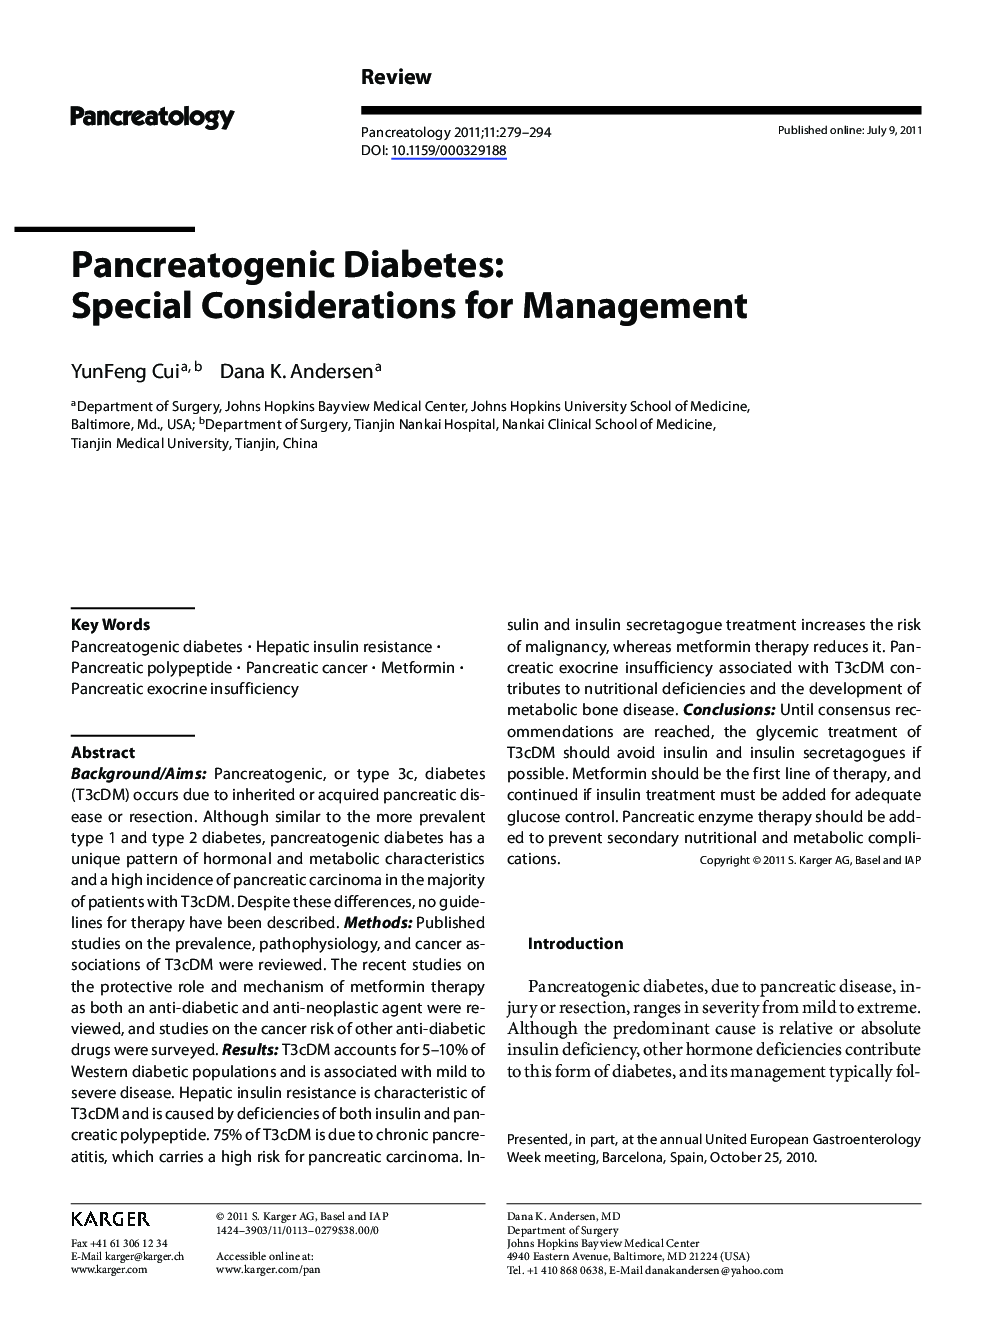 Pancreatogenic Diabetes: Special Considerations for Management